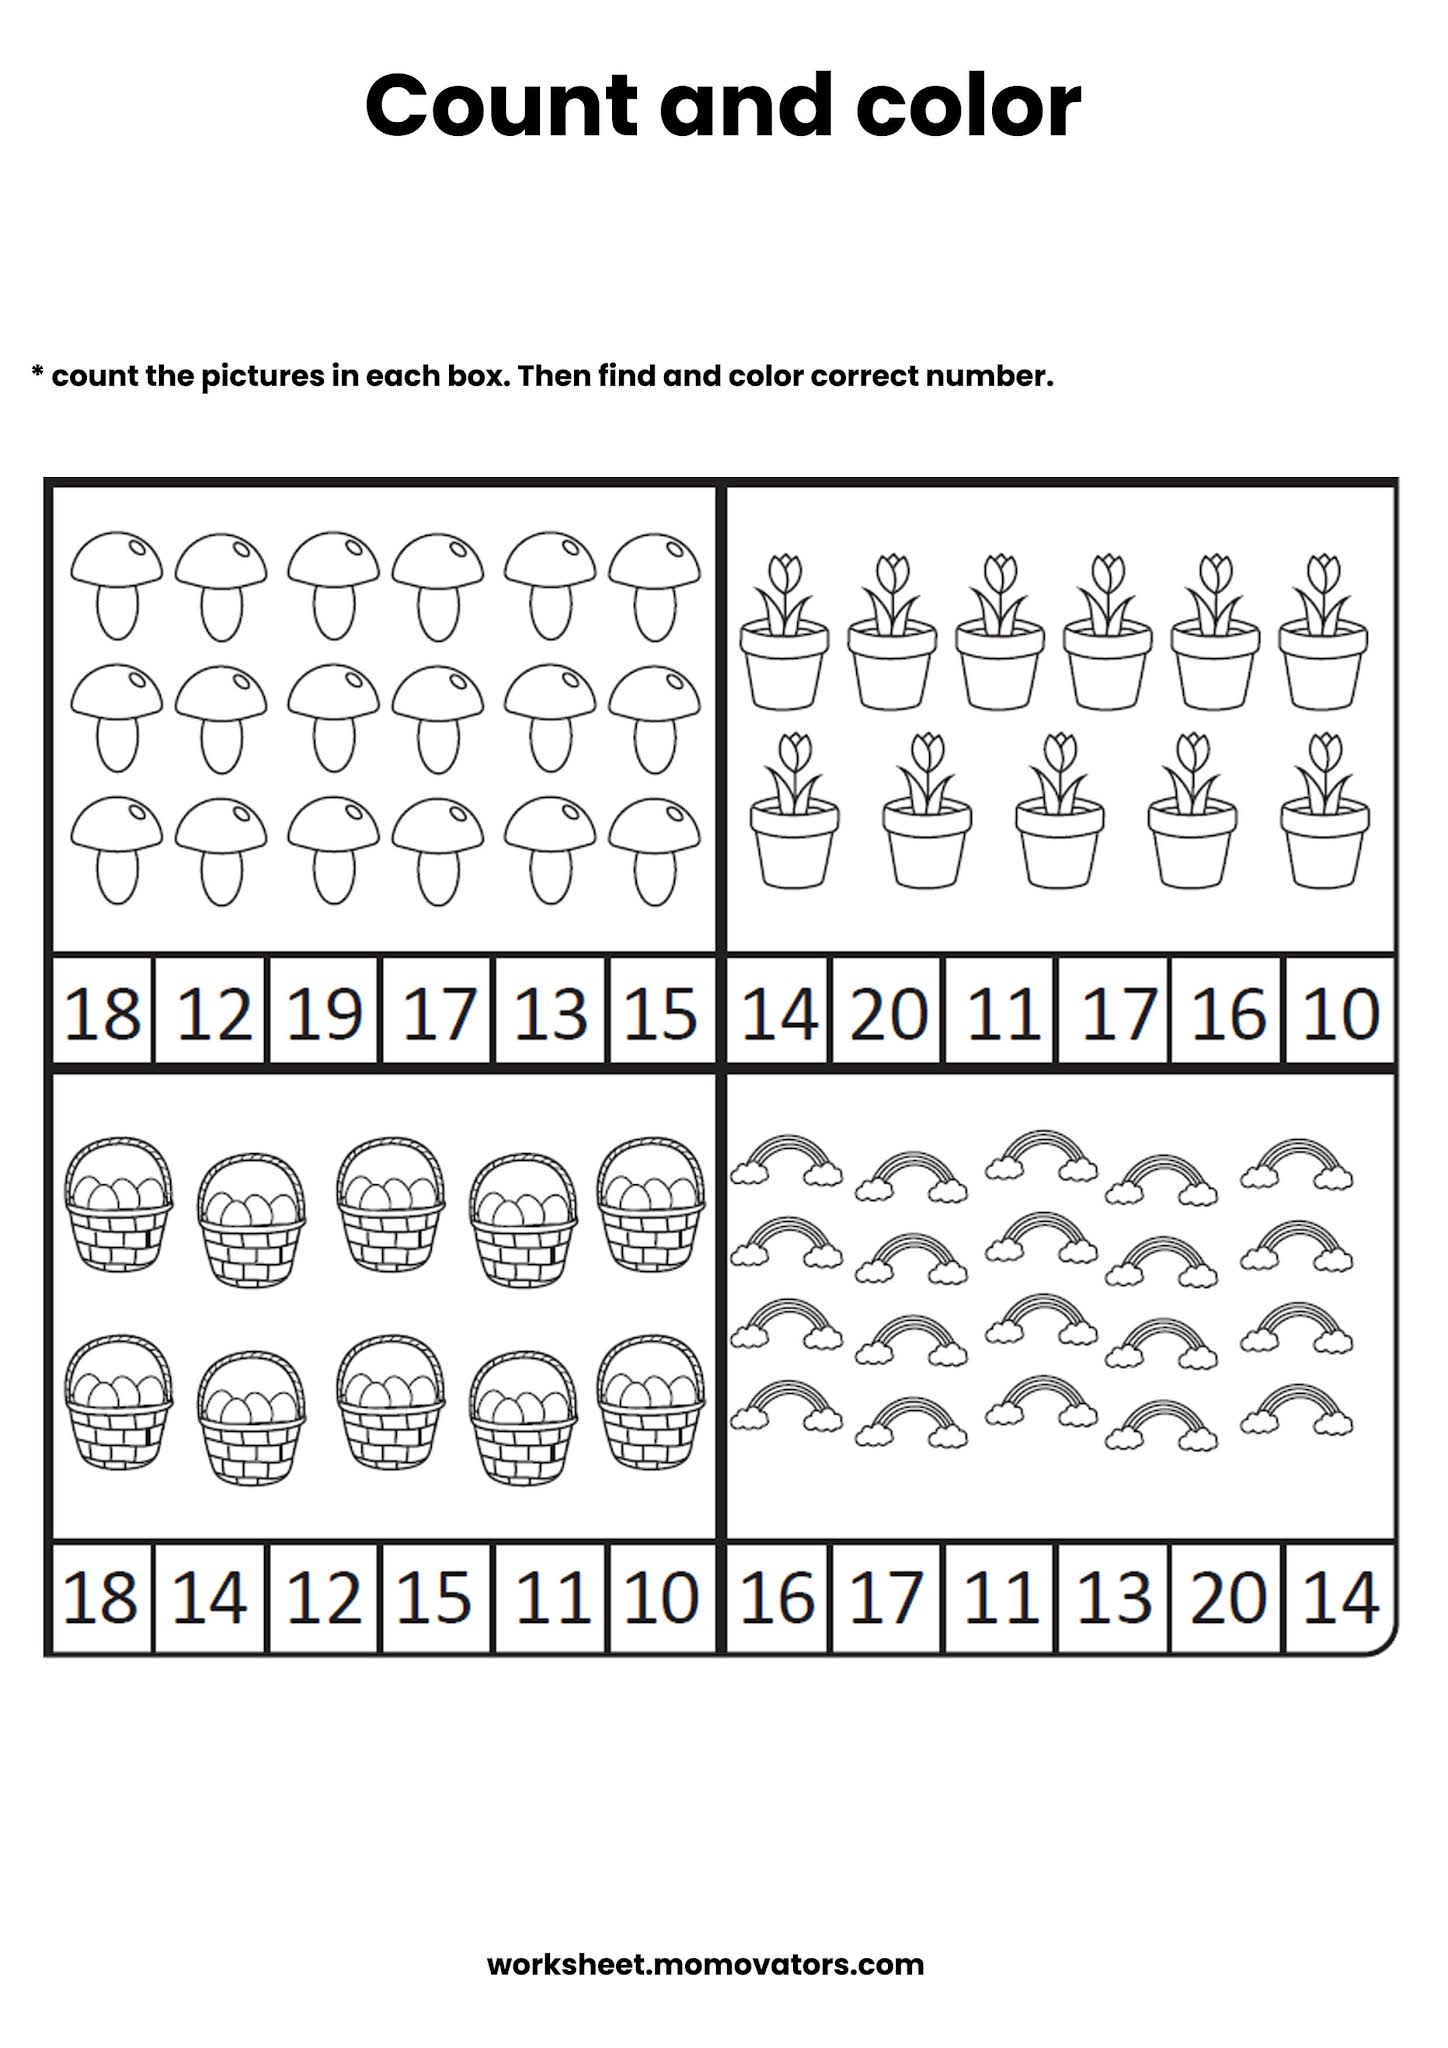 number-matching-11-20-worksheet-twisty-noodle-matching-numbers-to-20-11-20-cut-and-paste-by